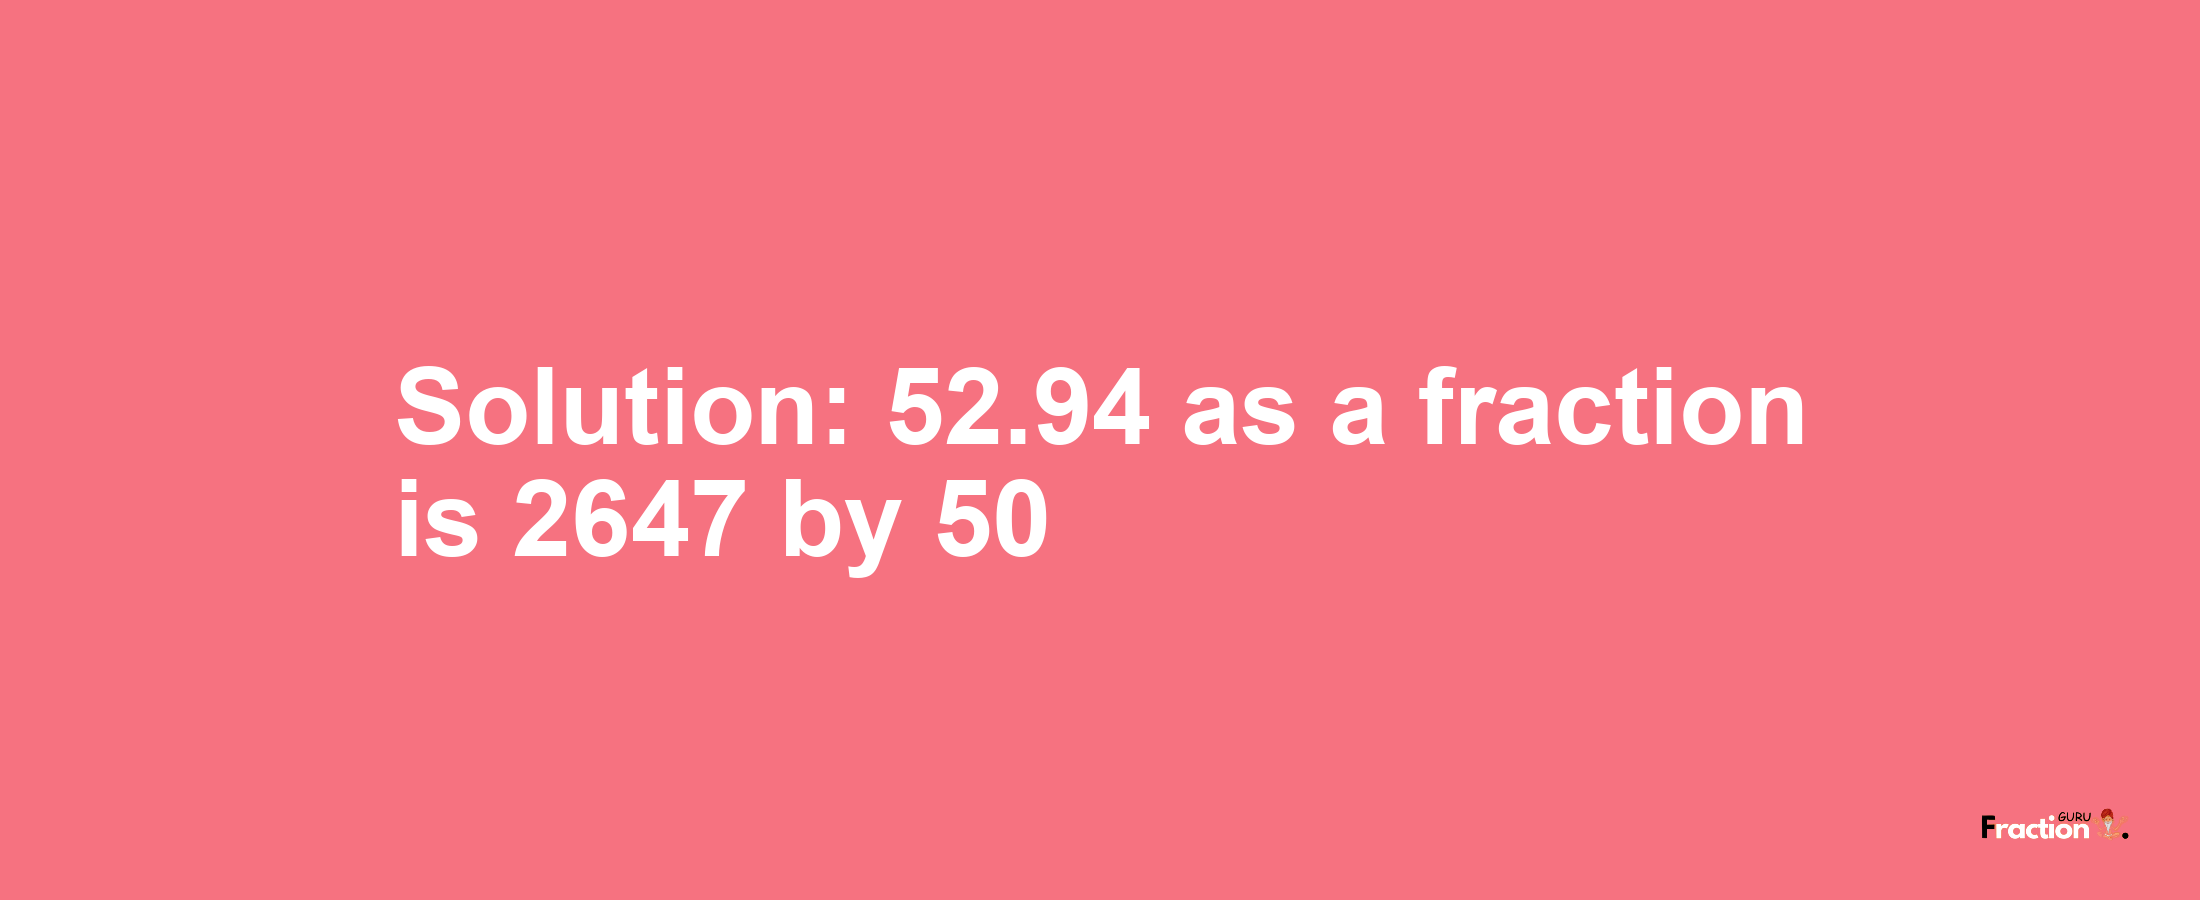 Solution:52.94 as a fraction is 2647/50